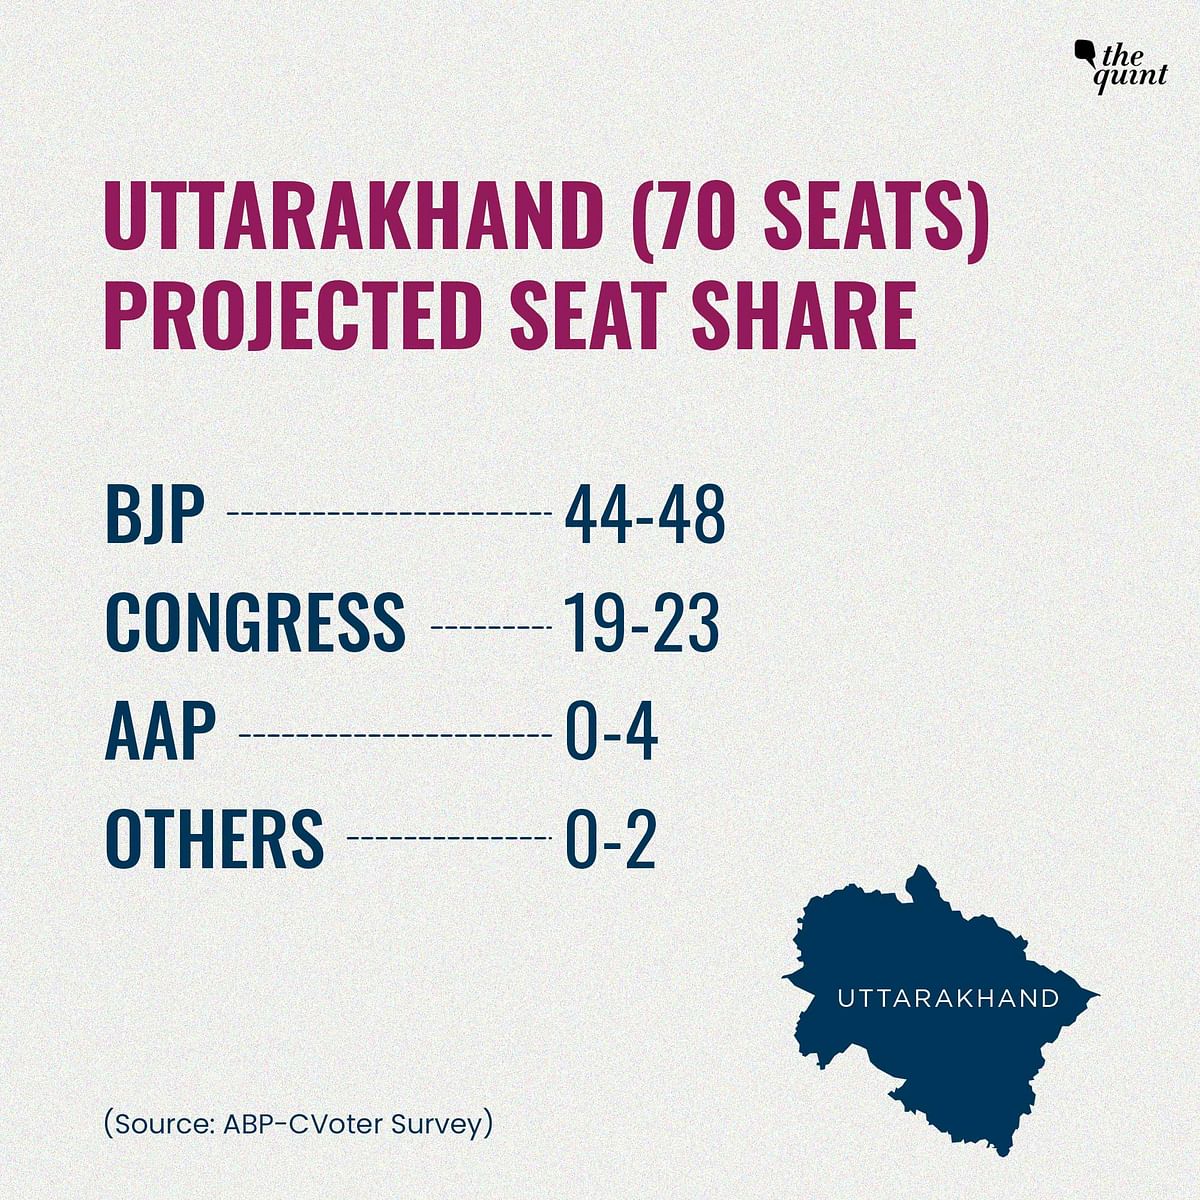 The data placed BJP ahead of other parties, projecting that they will win 46 of Uttarakhand's 70 Assembly seats.